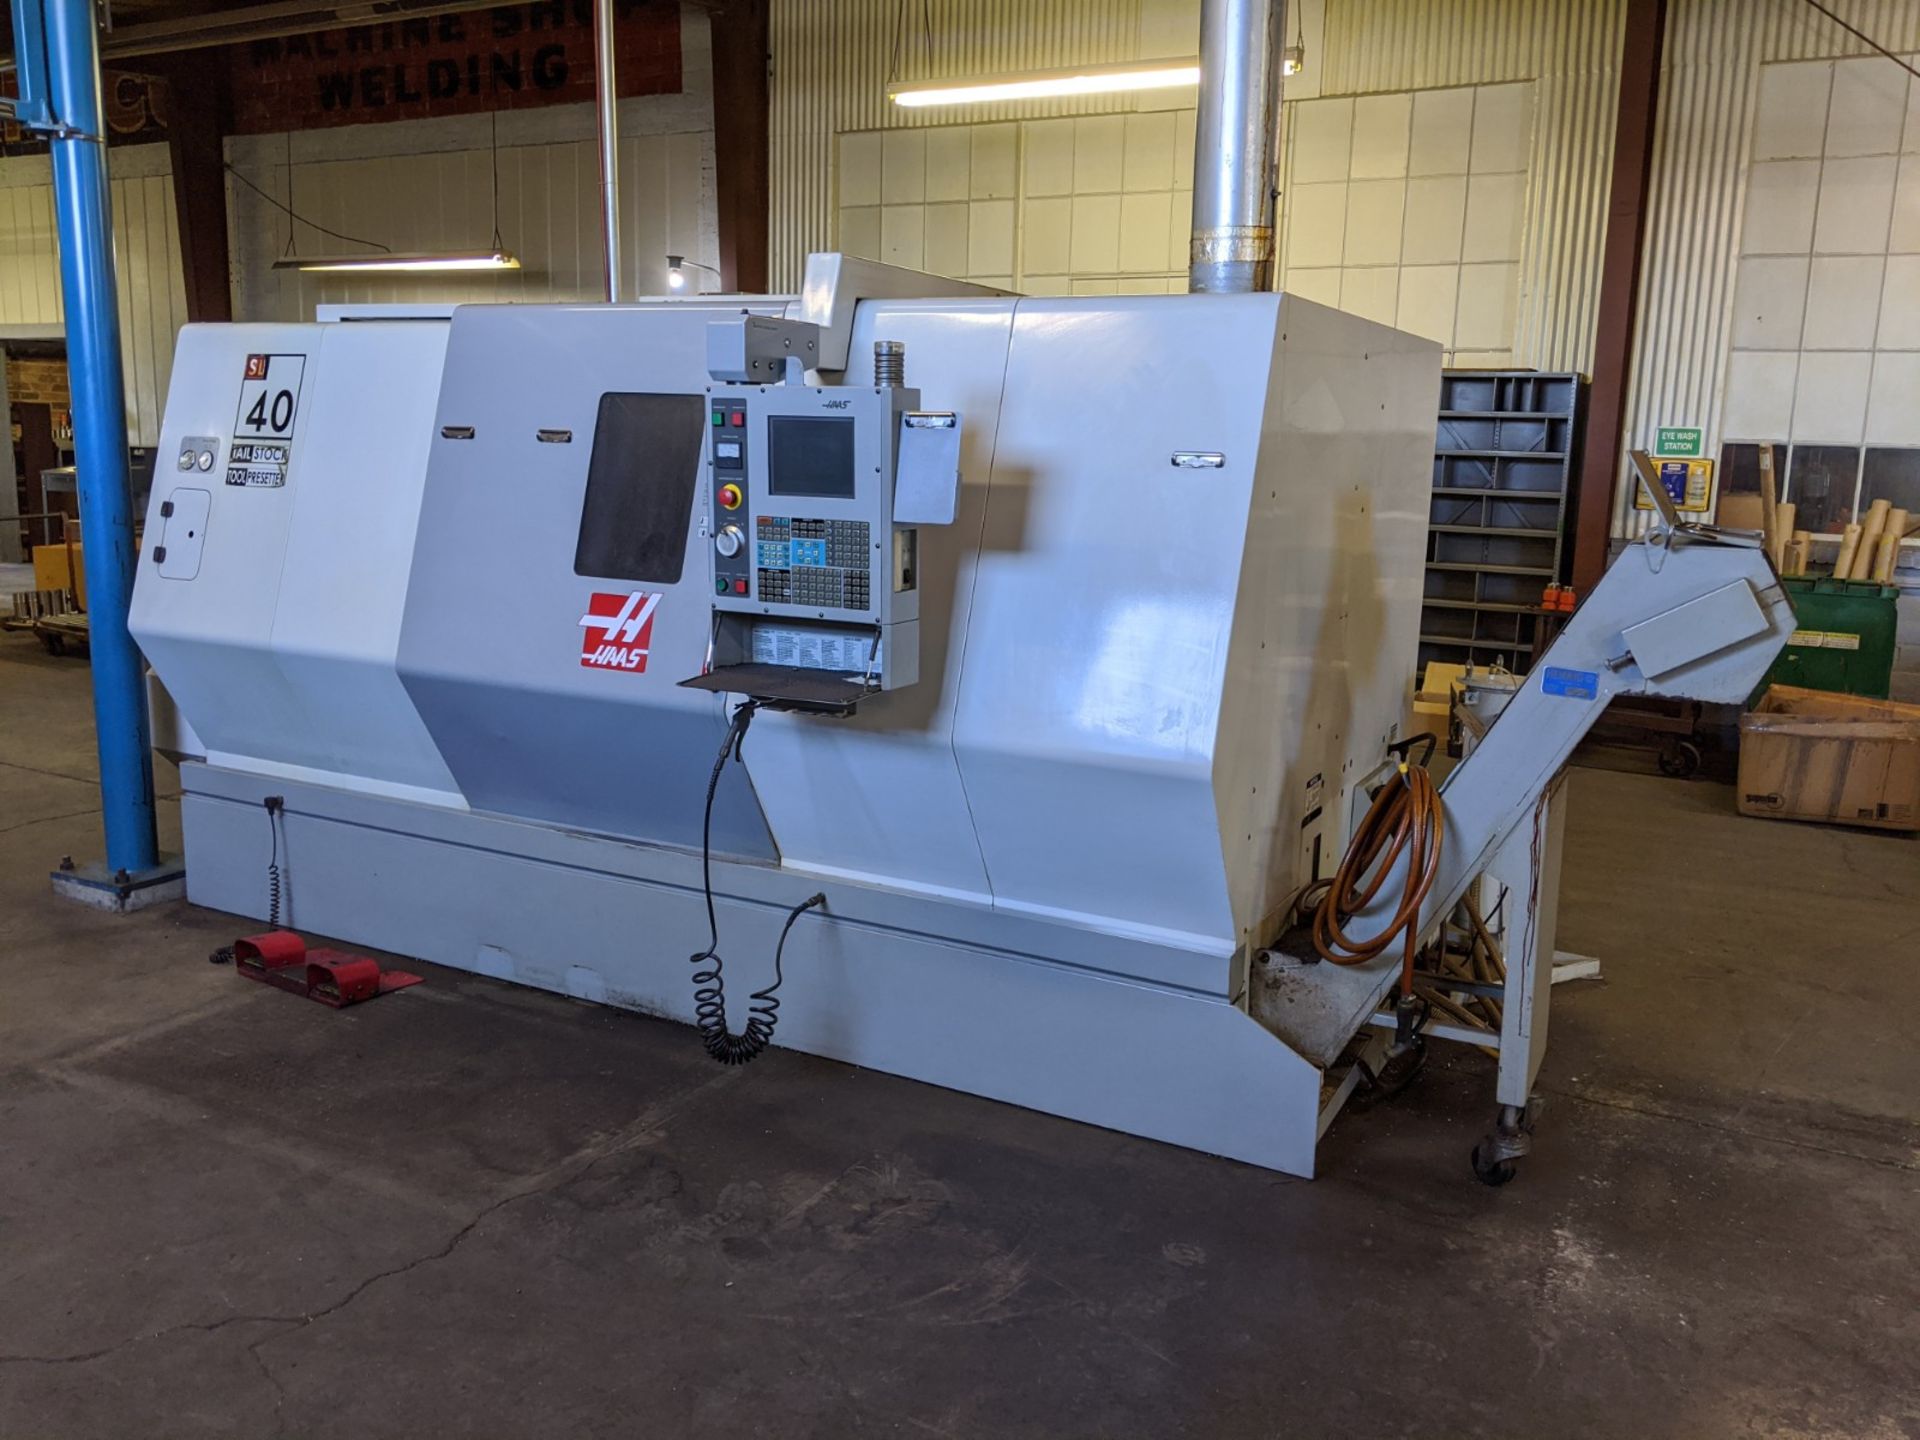 HAAS MODEL SL-40T CNC TURNING CENTER; S/N 69082, 18" 3-JAW CHUCK, 10 POSITION TURRET, TAILSTOCK, - Image 12 of 14